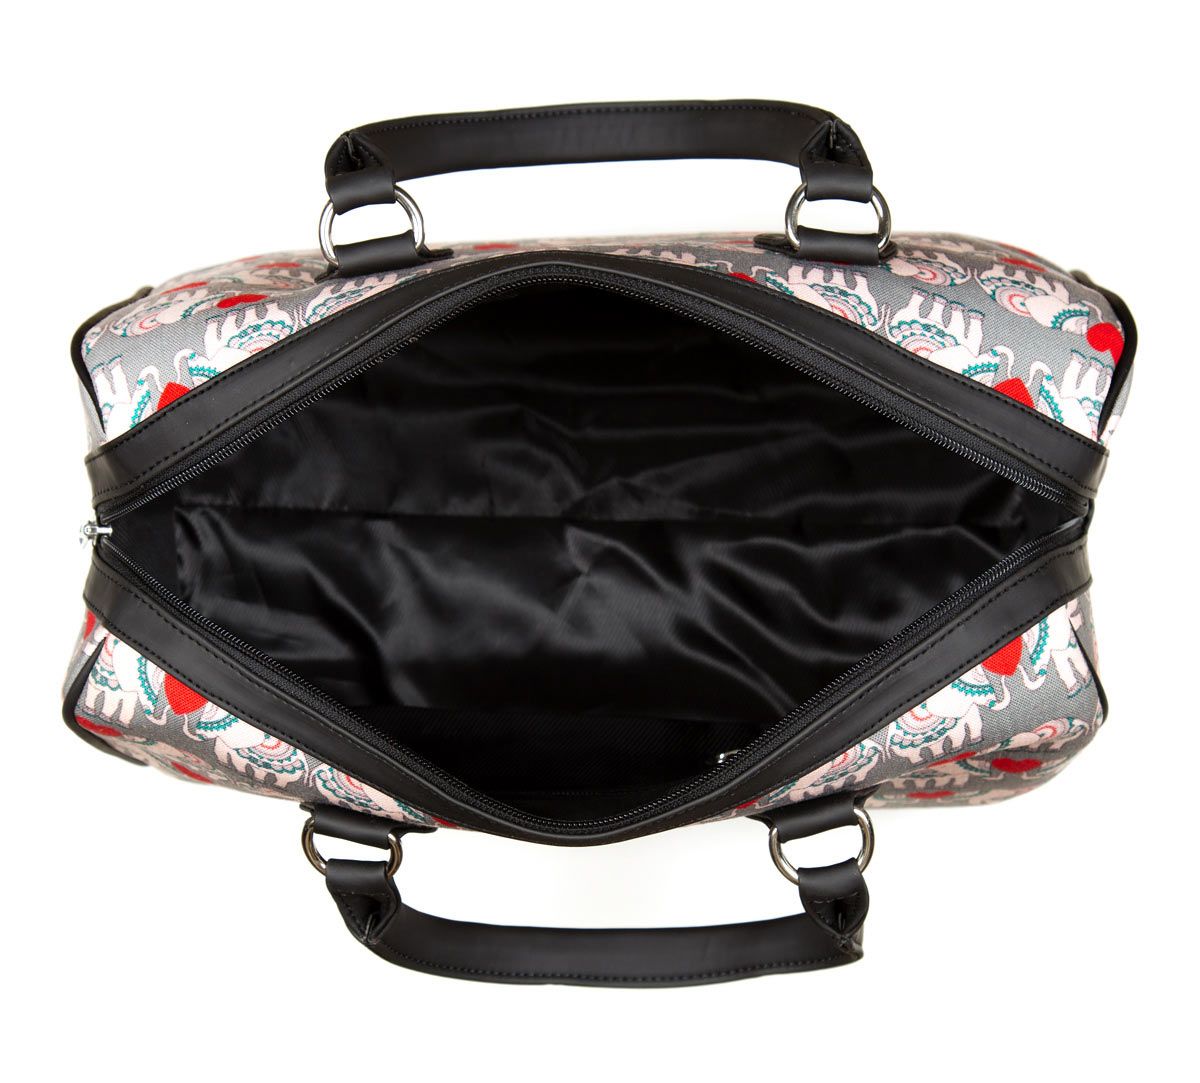 Shop for Gorgeous Duffle Bags online | India Circus